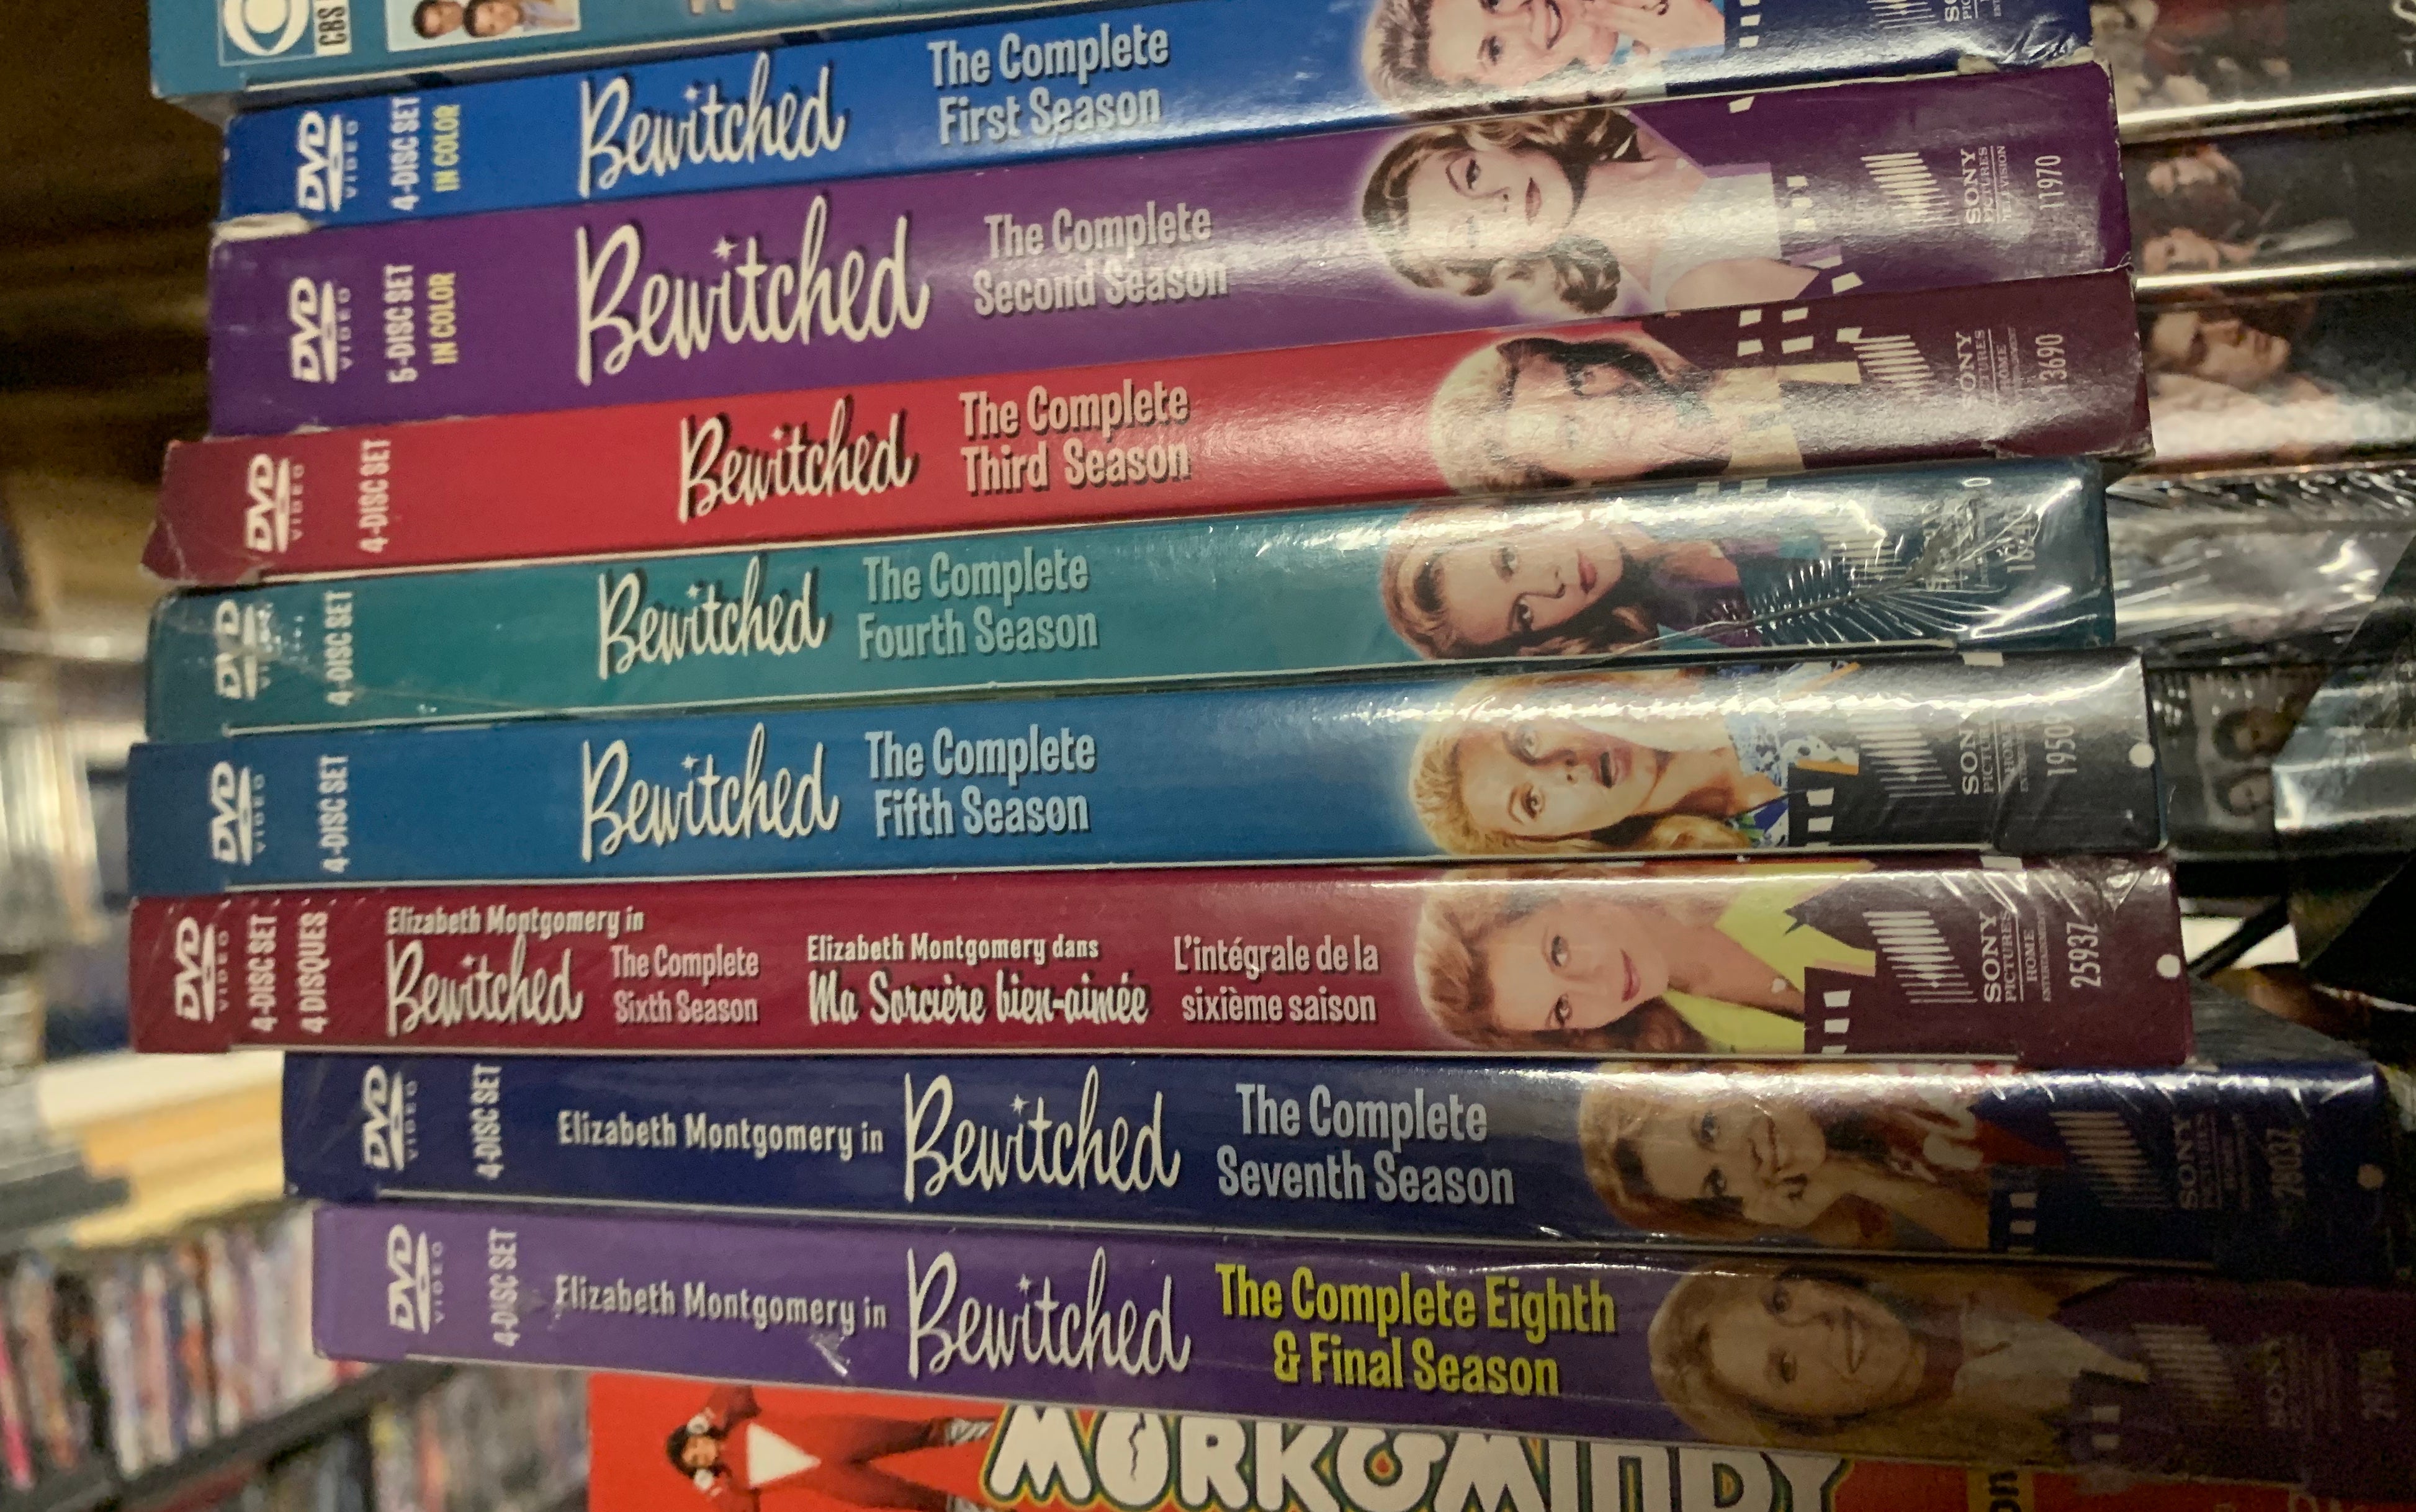 Bewitched - TV Series on DVD - Seasons 1 - 8 (Mint) - Retro Revolution Records